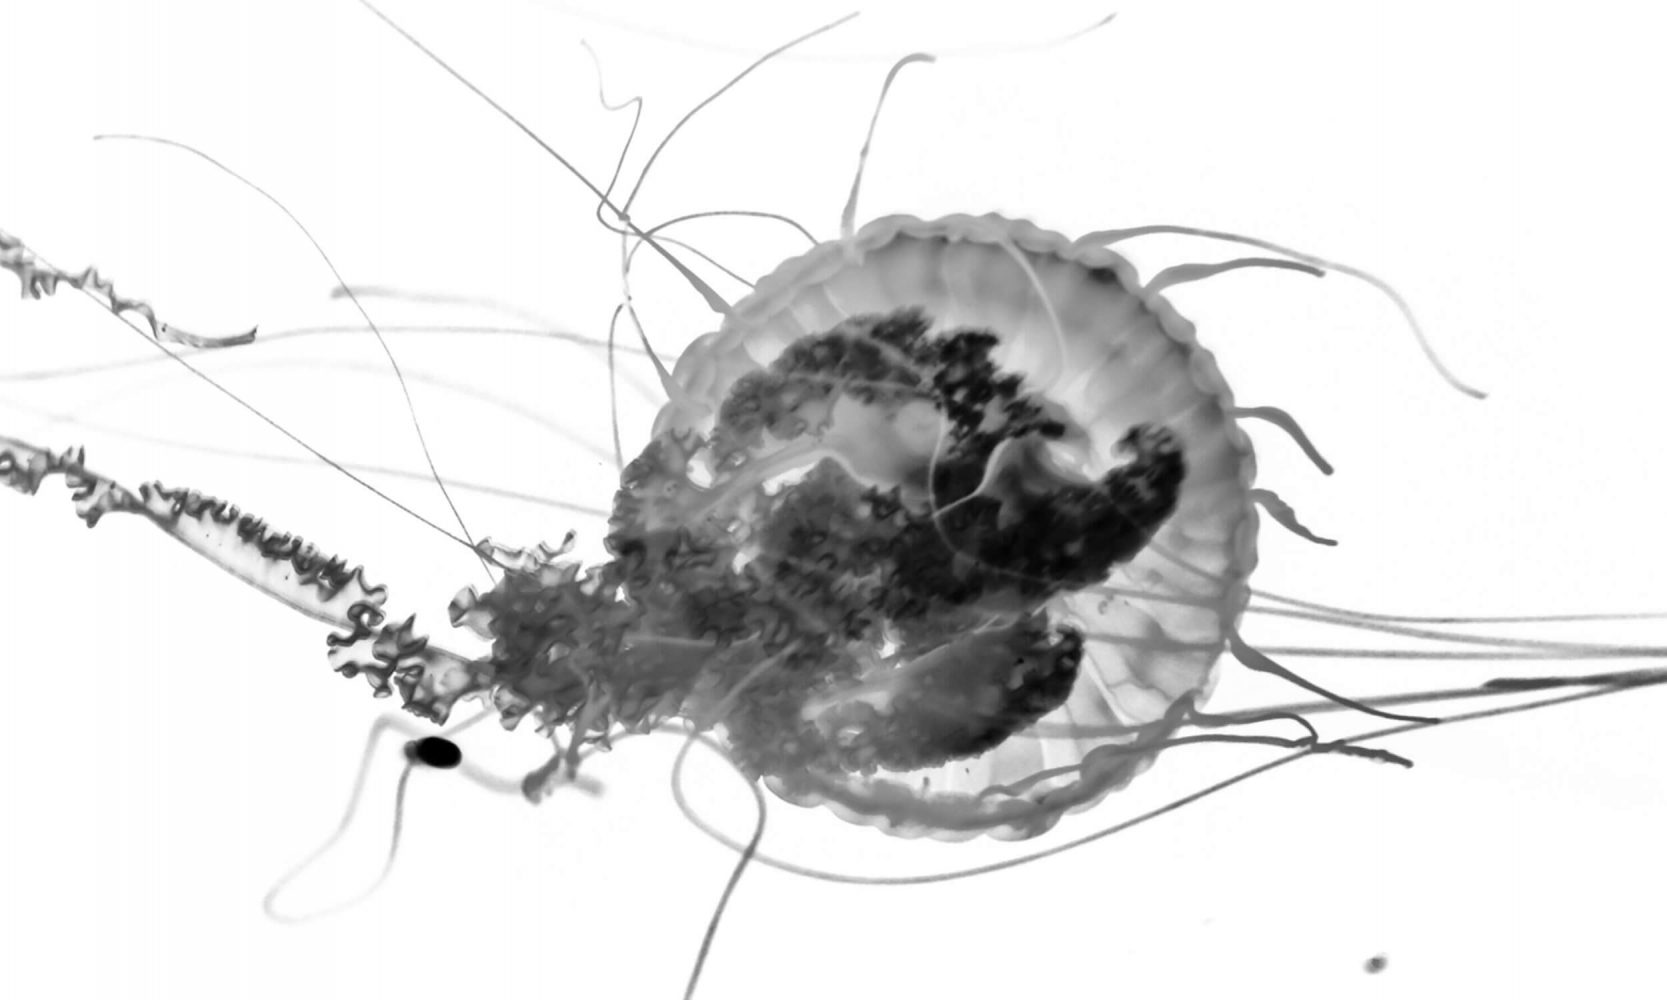 connectivity scan of jellyfish